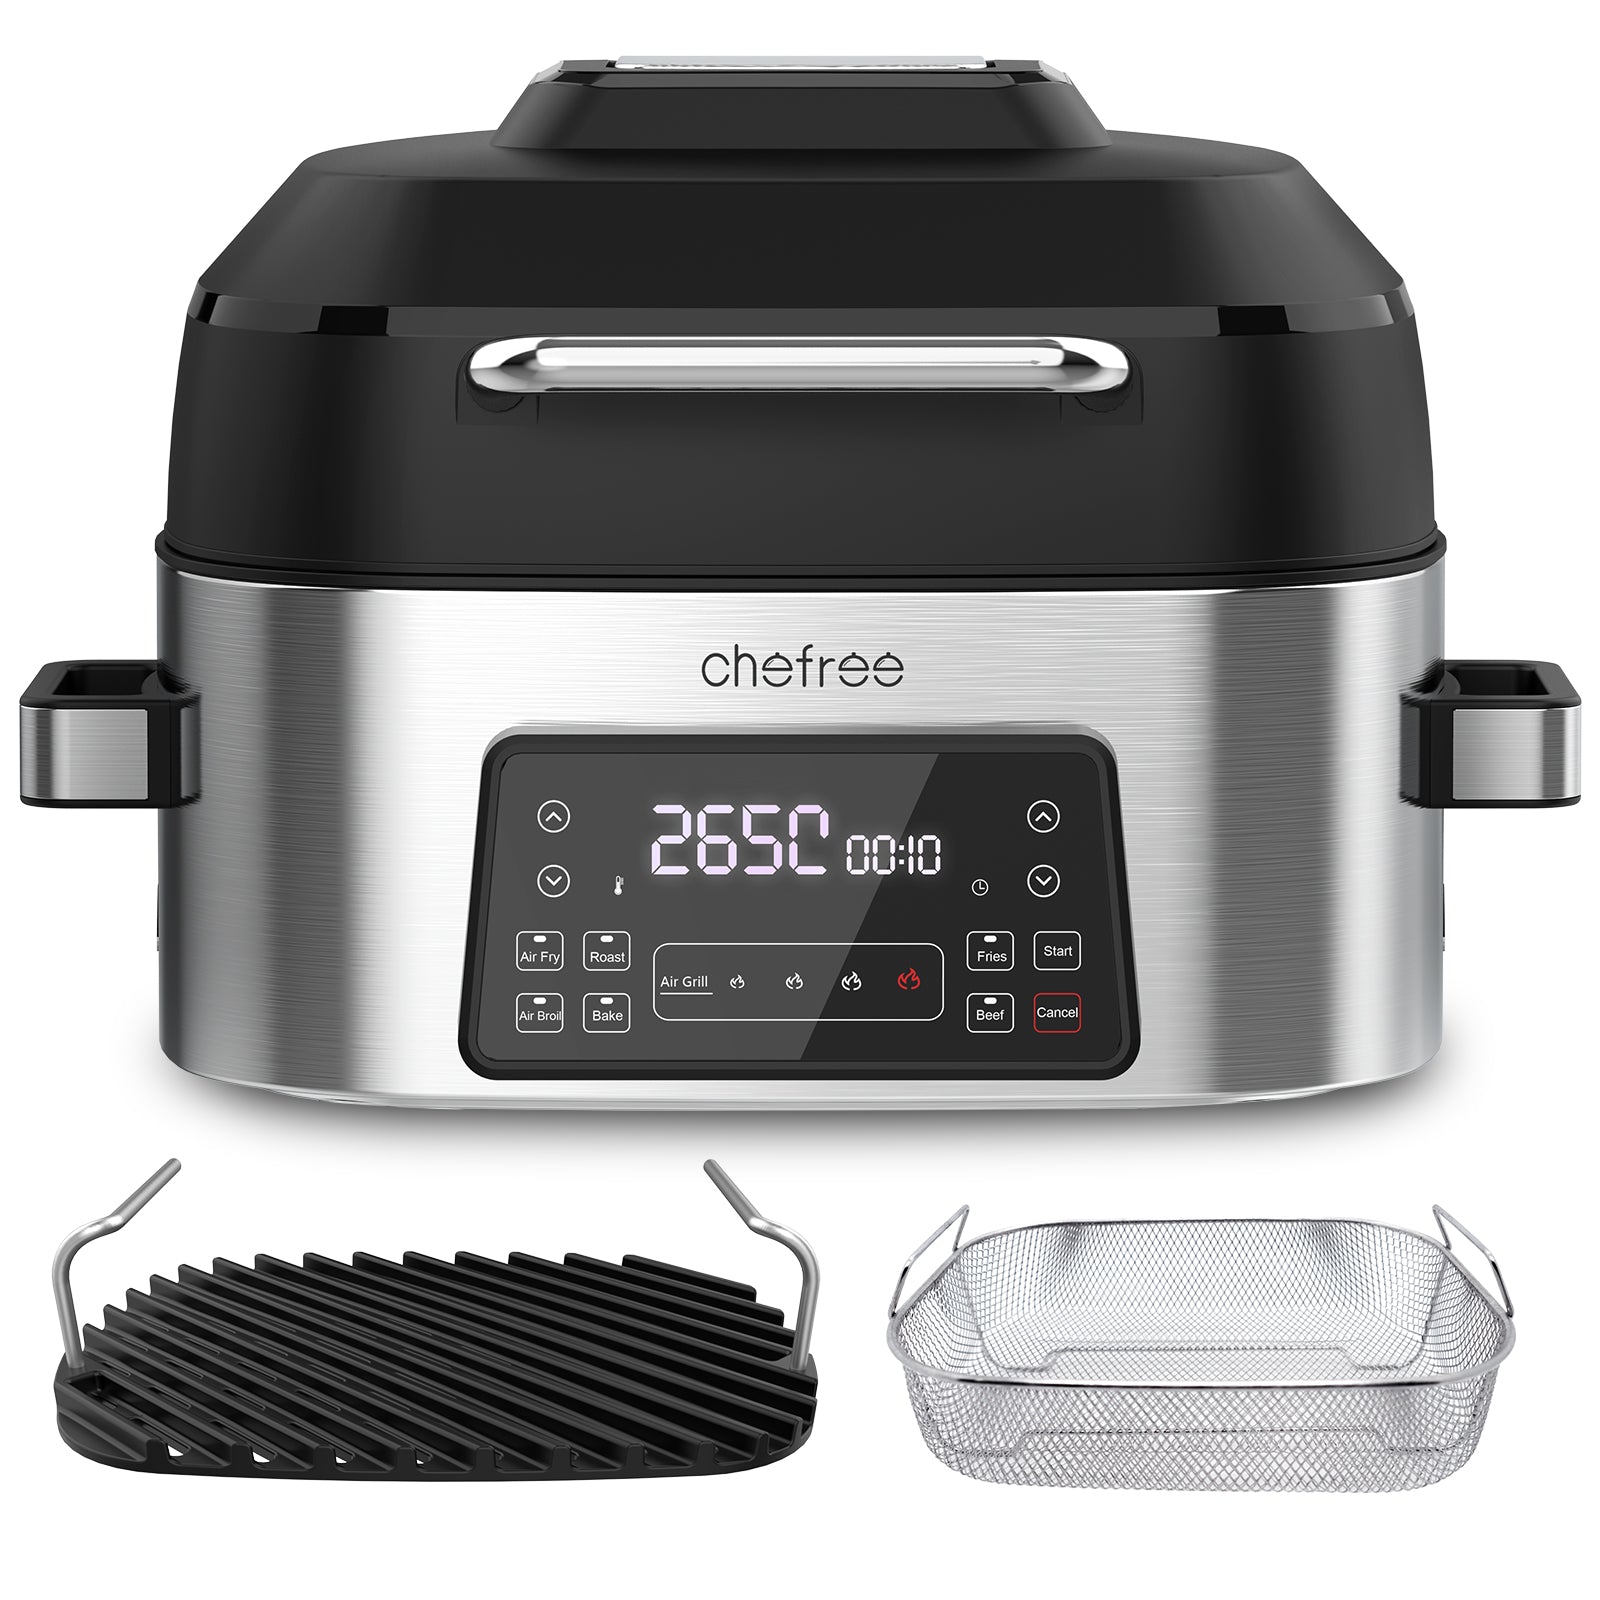 Chefree AFW01 Air Fryer and Toaster，5L 1500W Large Capacity Smart